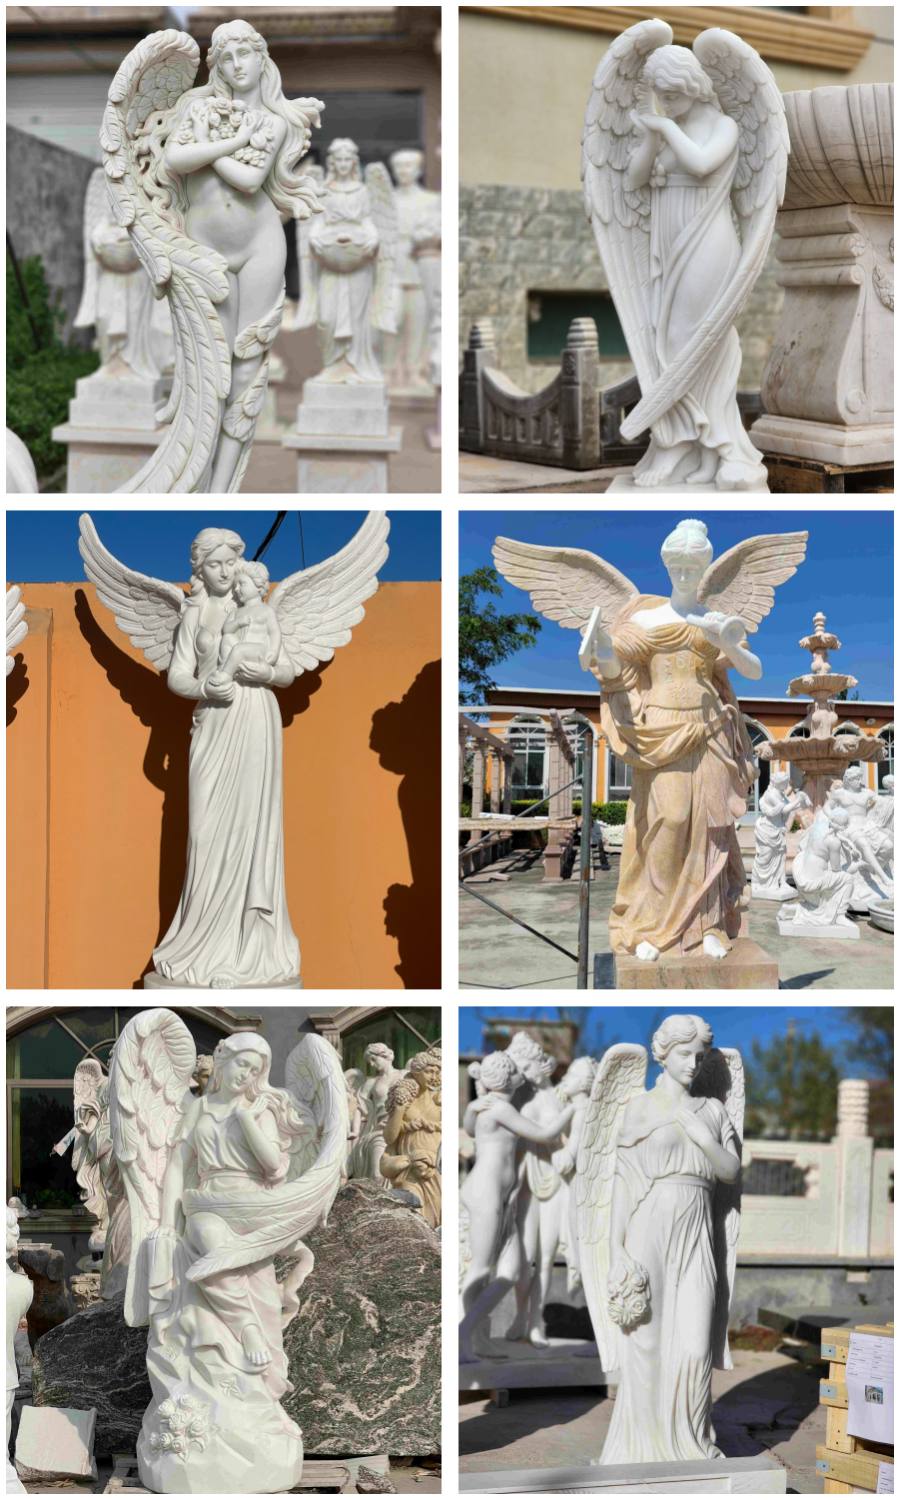 MORE angel statues